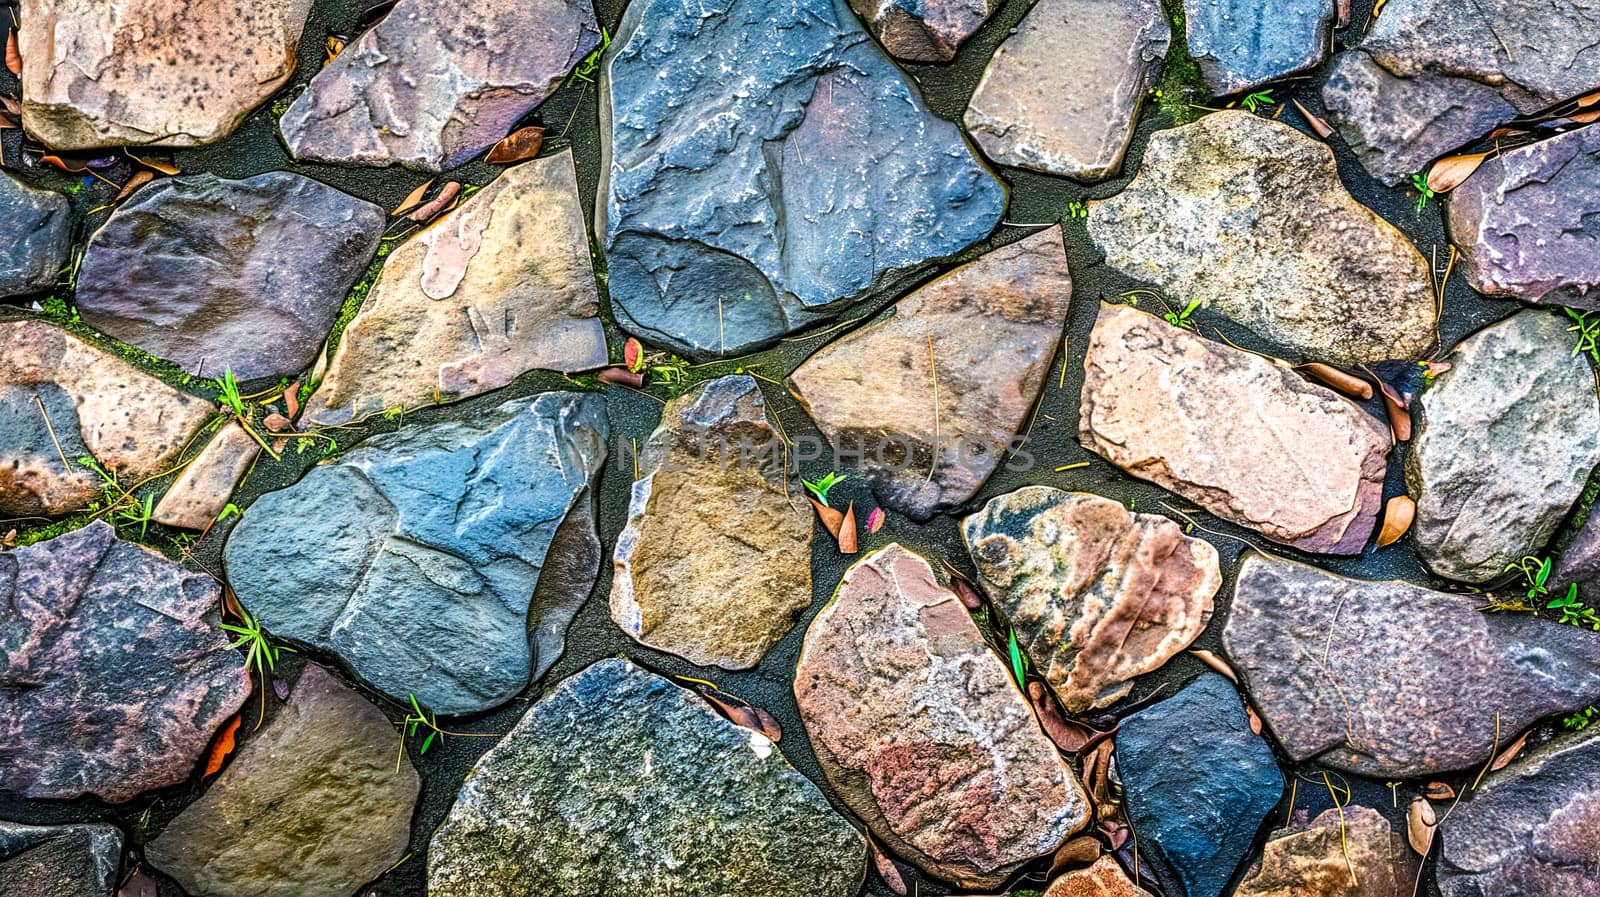 Multicolored cobblestone texture with green plant accents by Edophoto